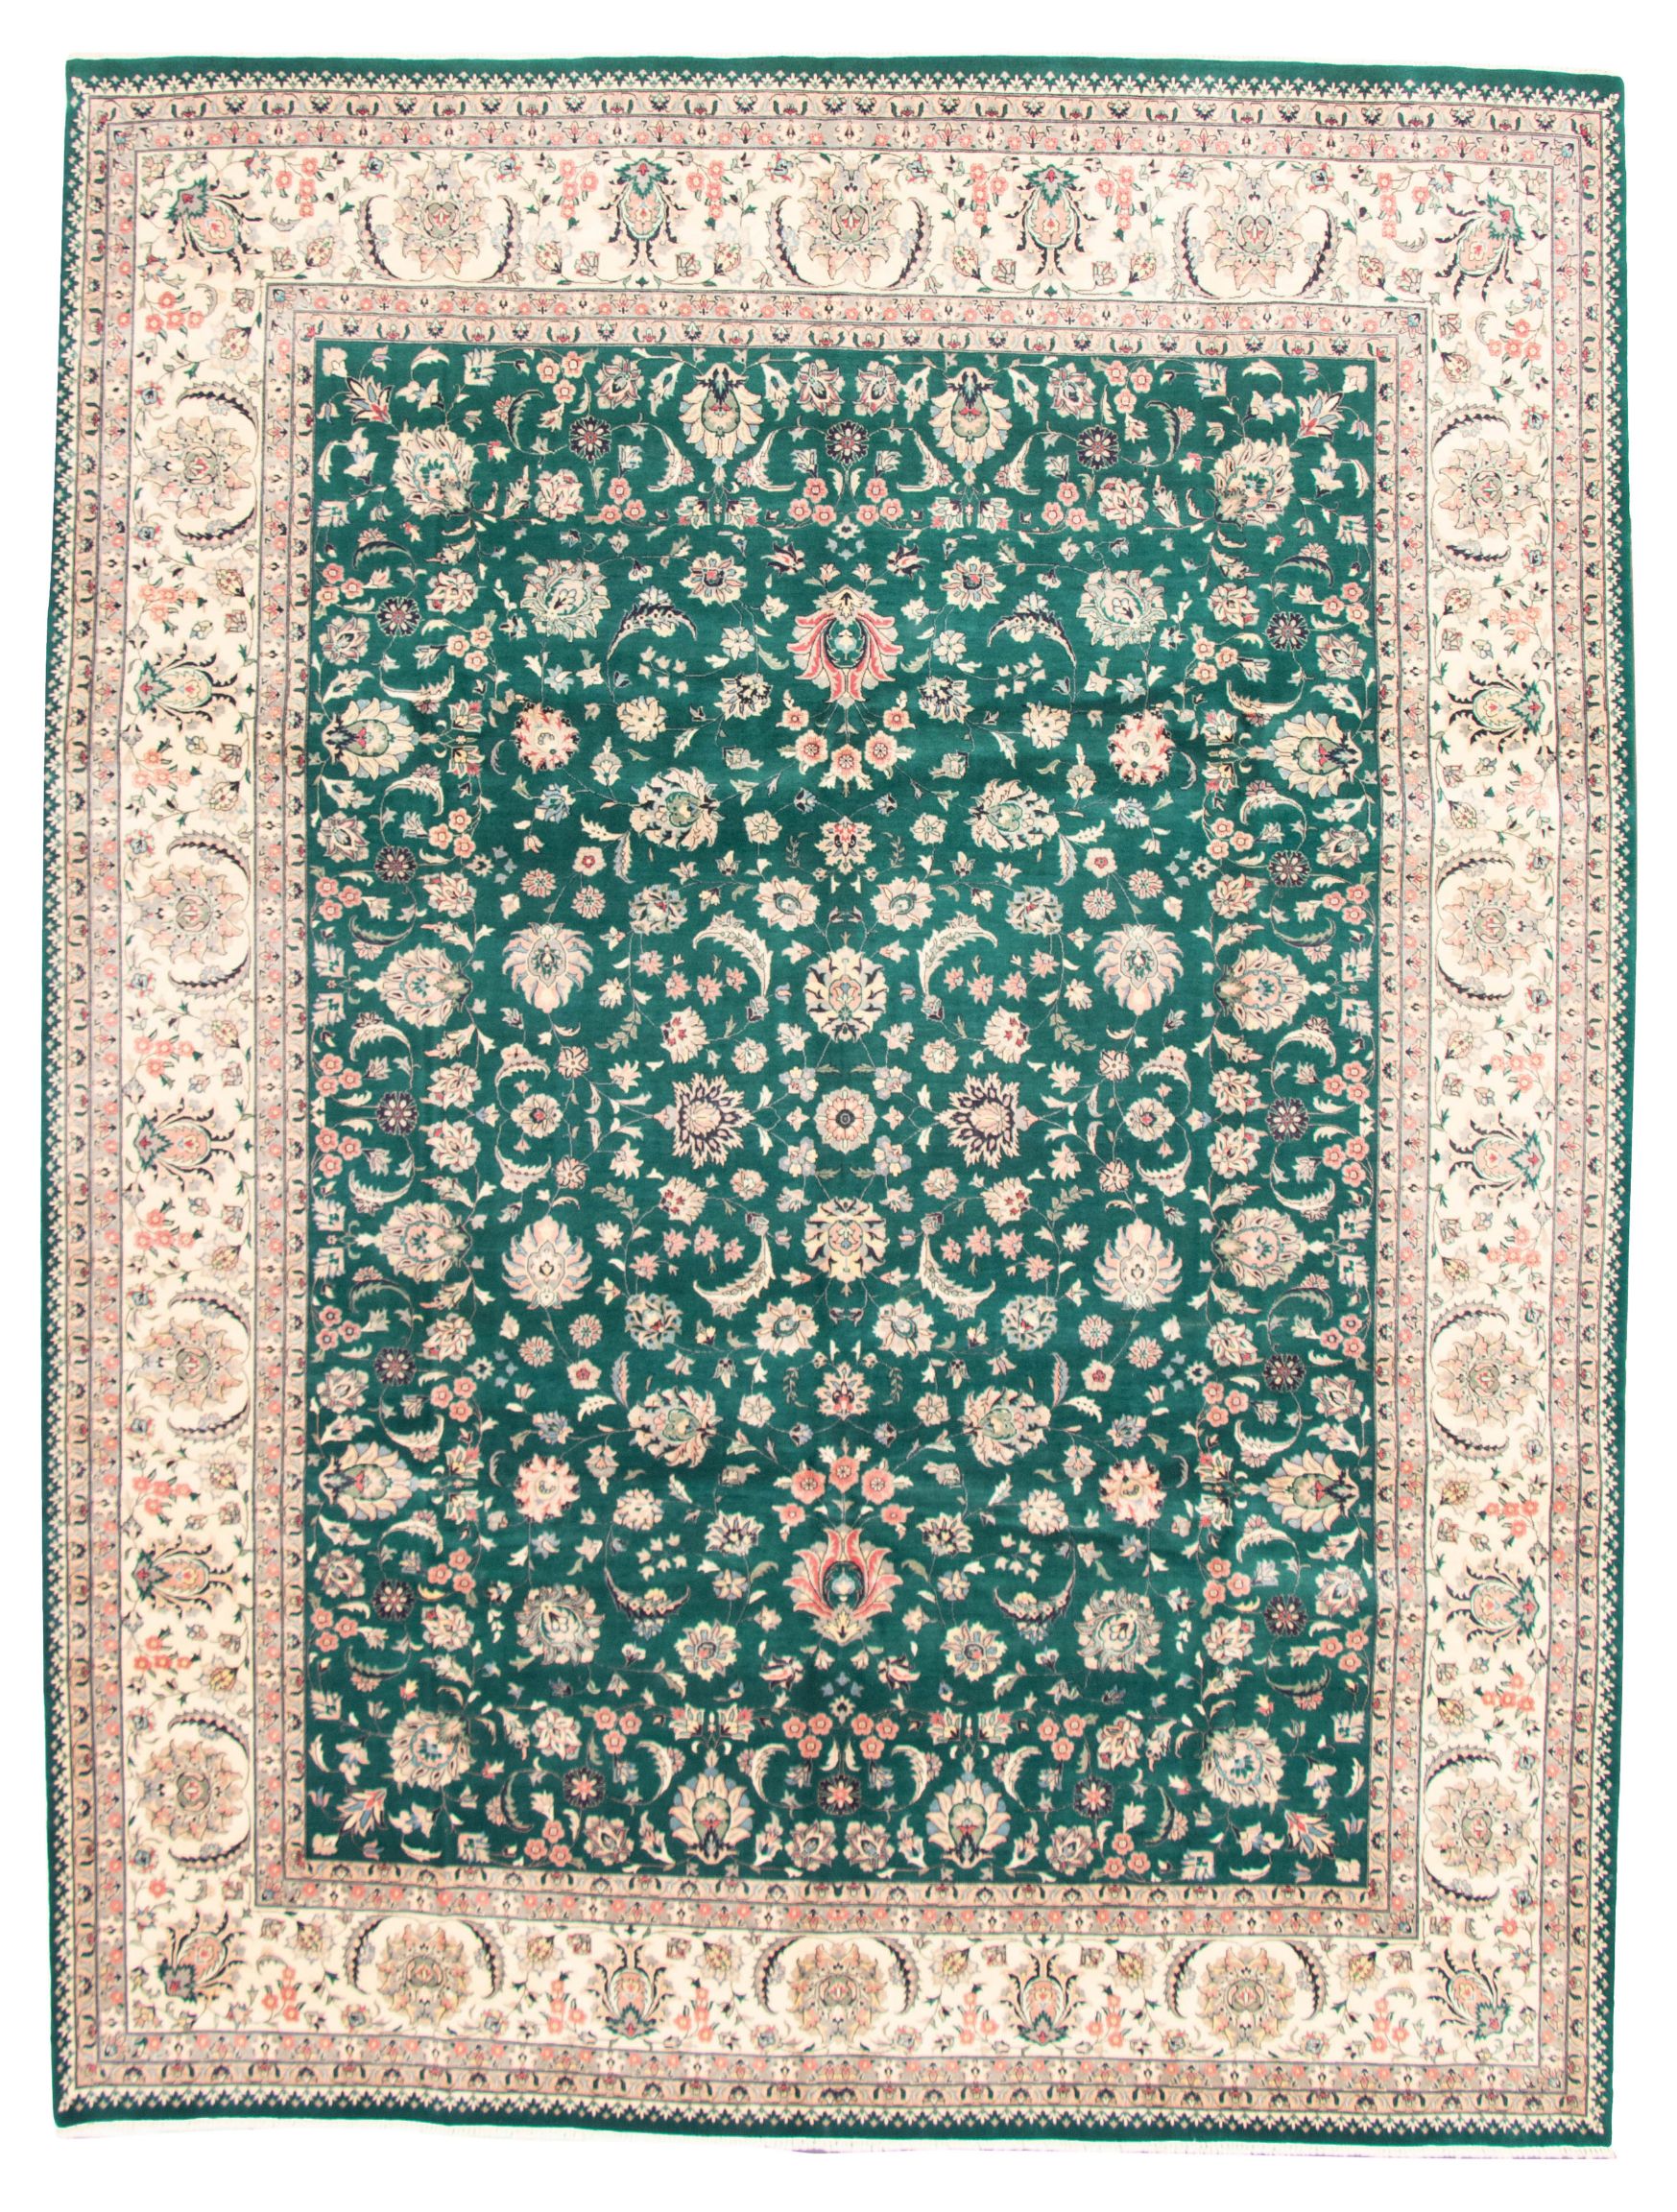 Hand-knotted Pako Persian 18/20 Teal Wool Rug 9'3" x 12'1"  Size: 9'3" x 12'1"  